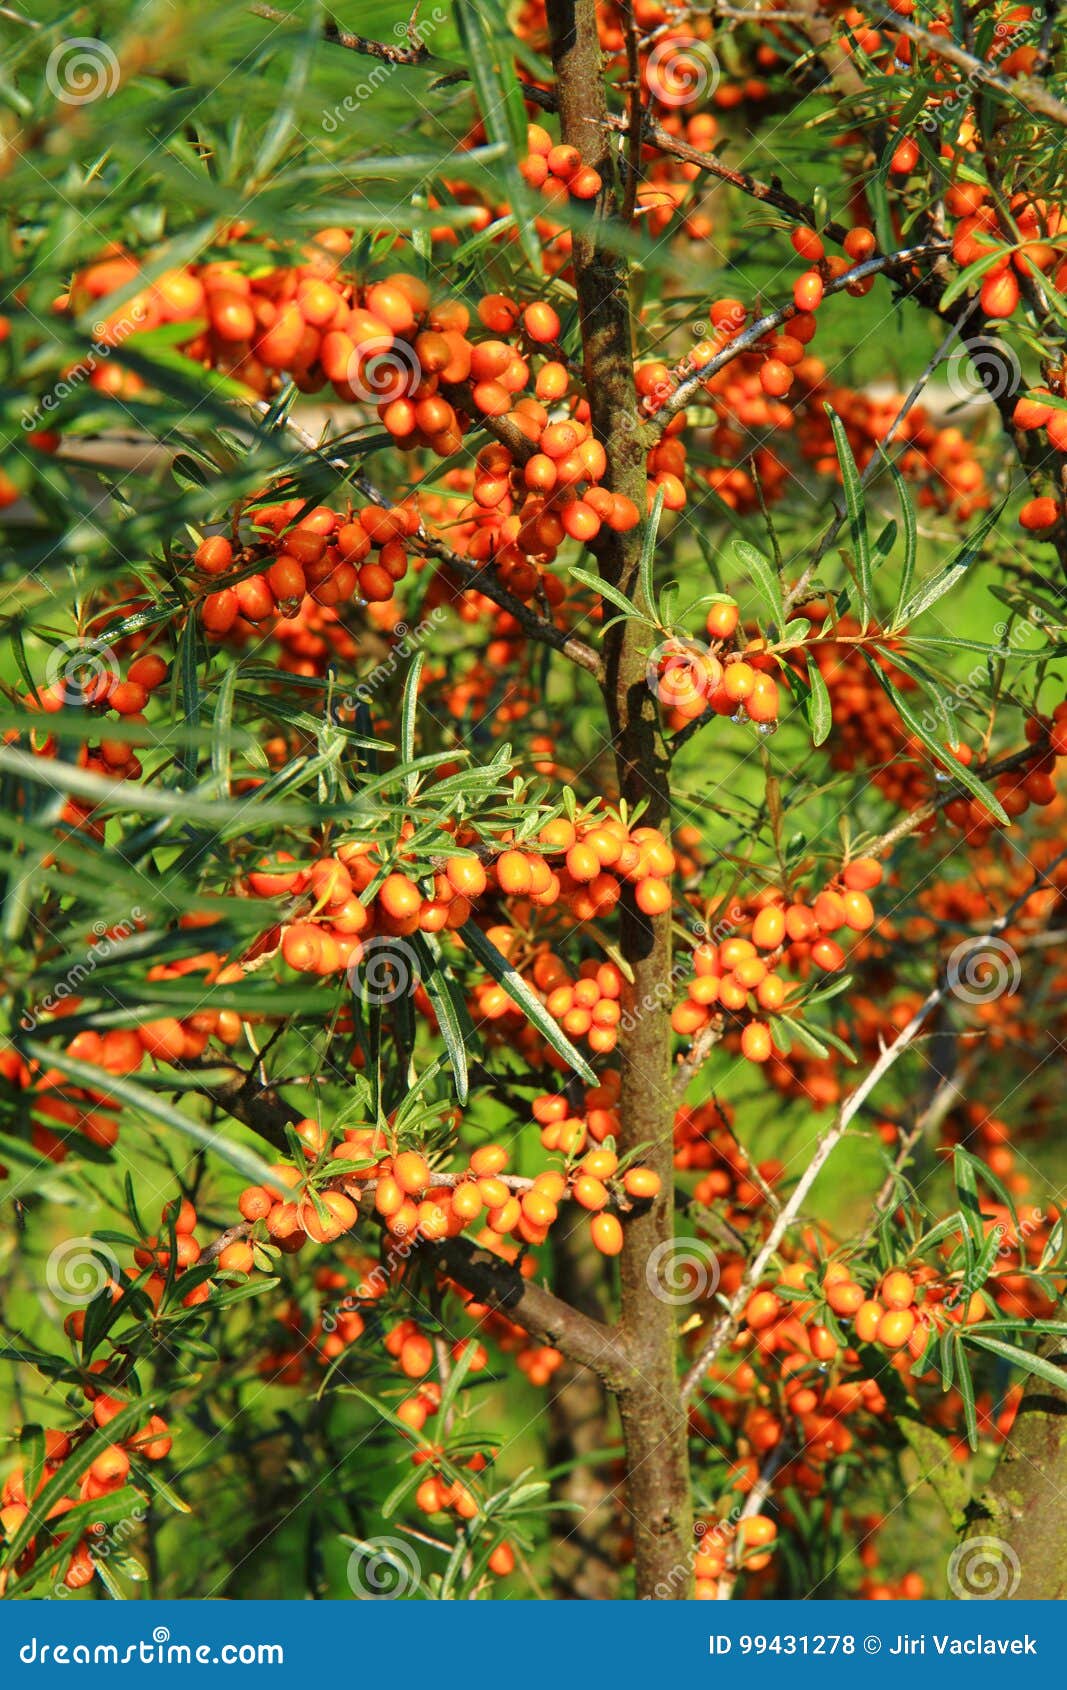 Sea Buckthorn Plant with Fruits Stock Photo   Image of green ...